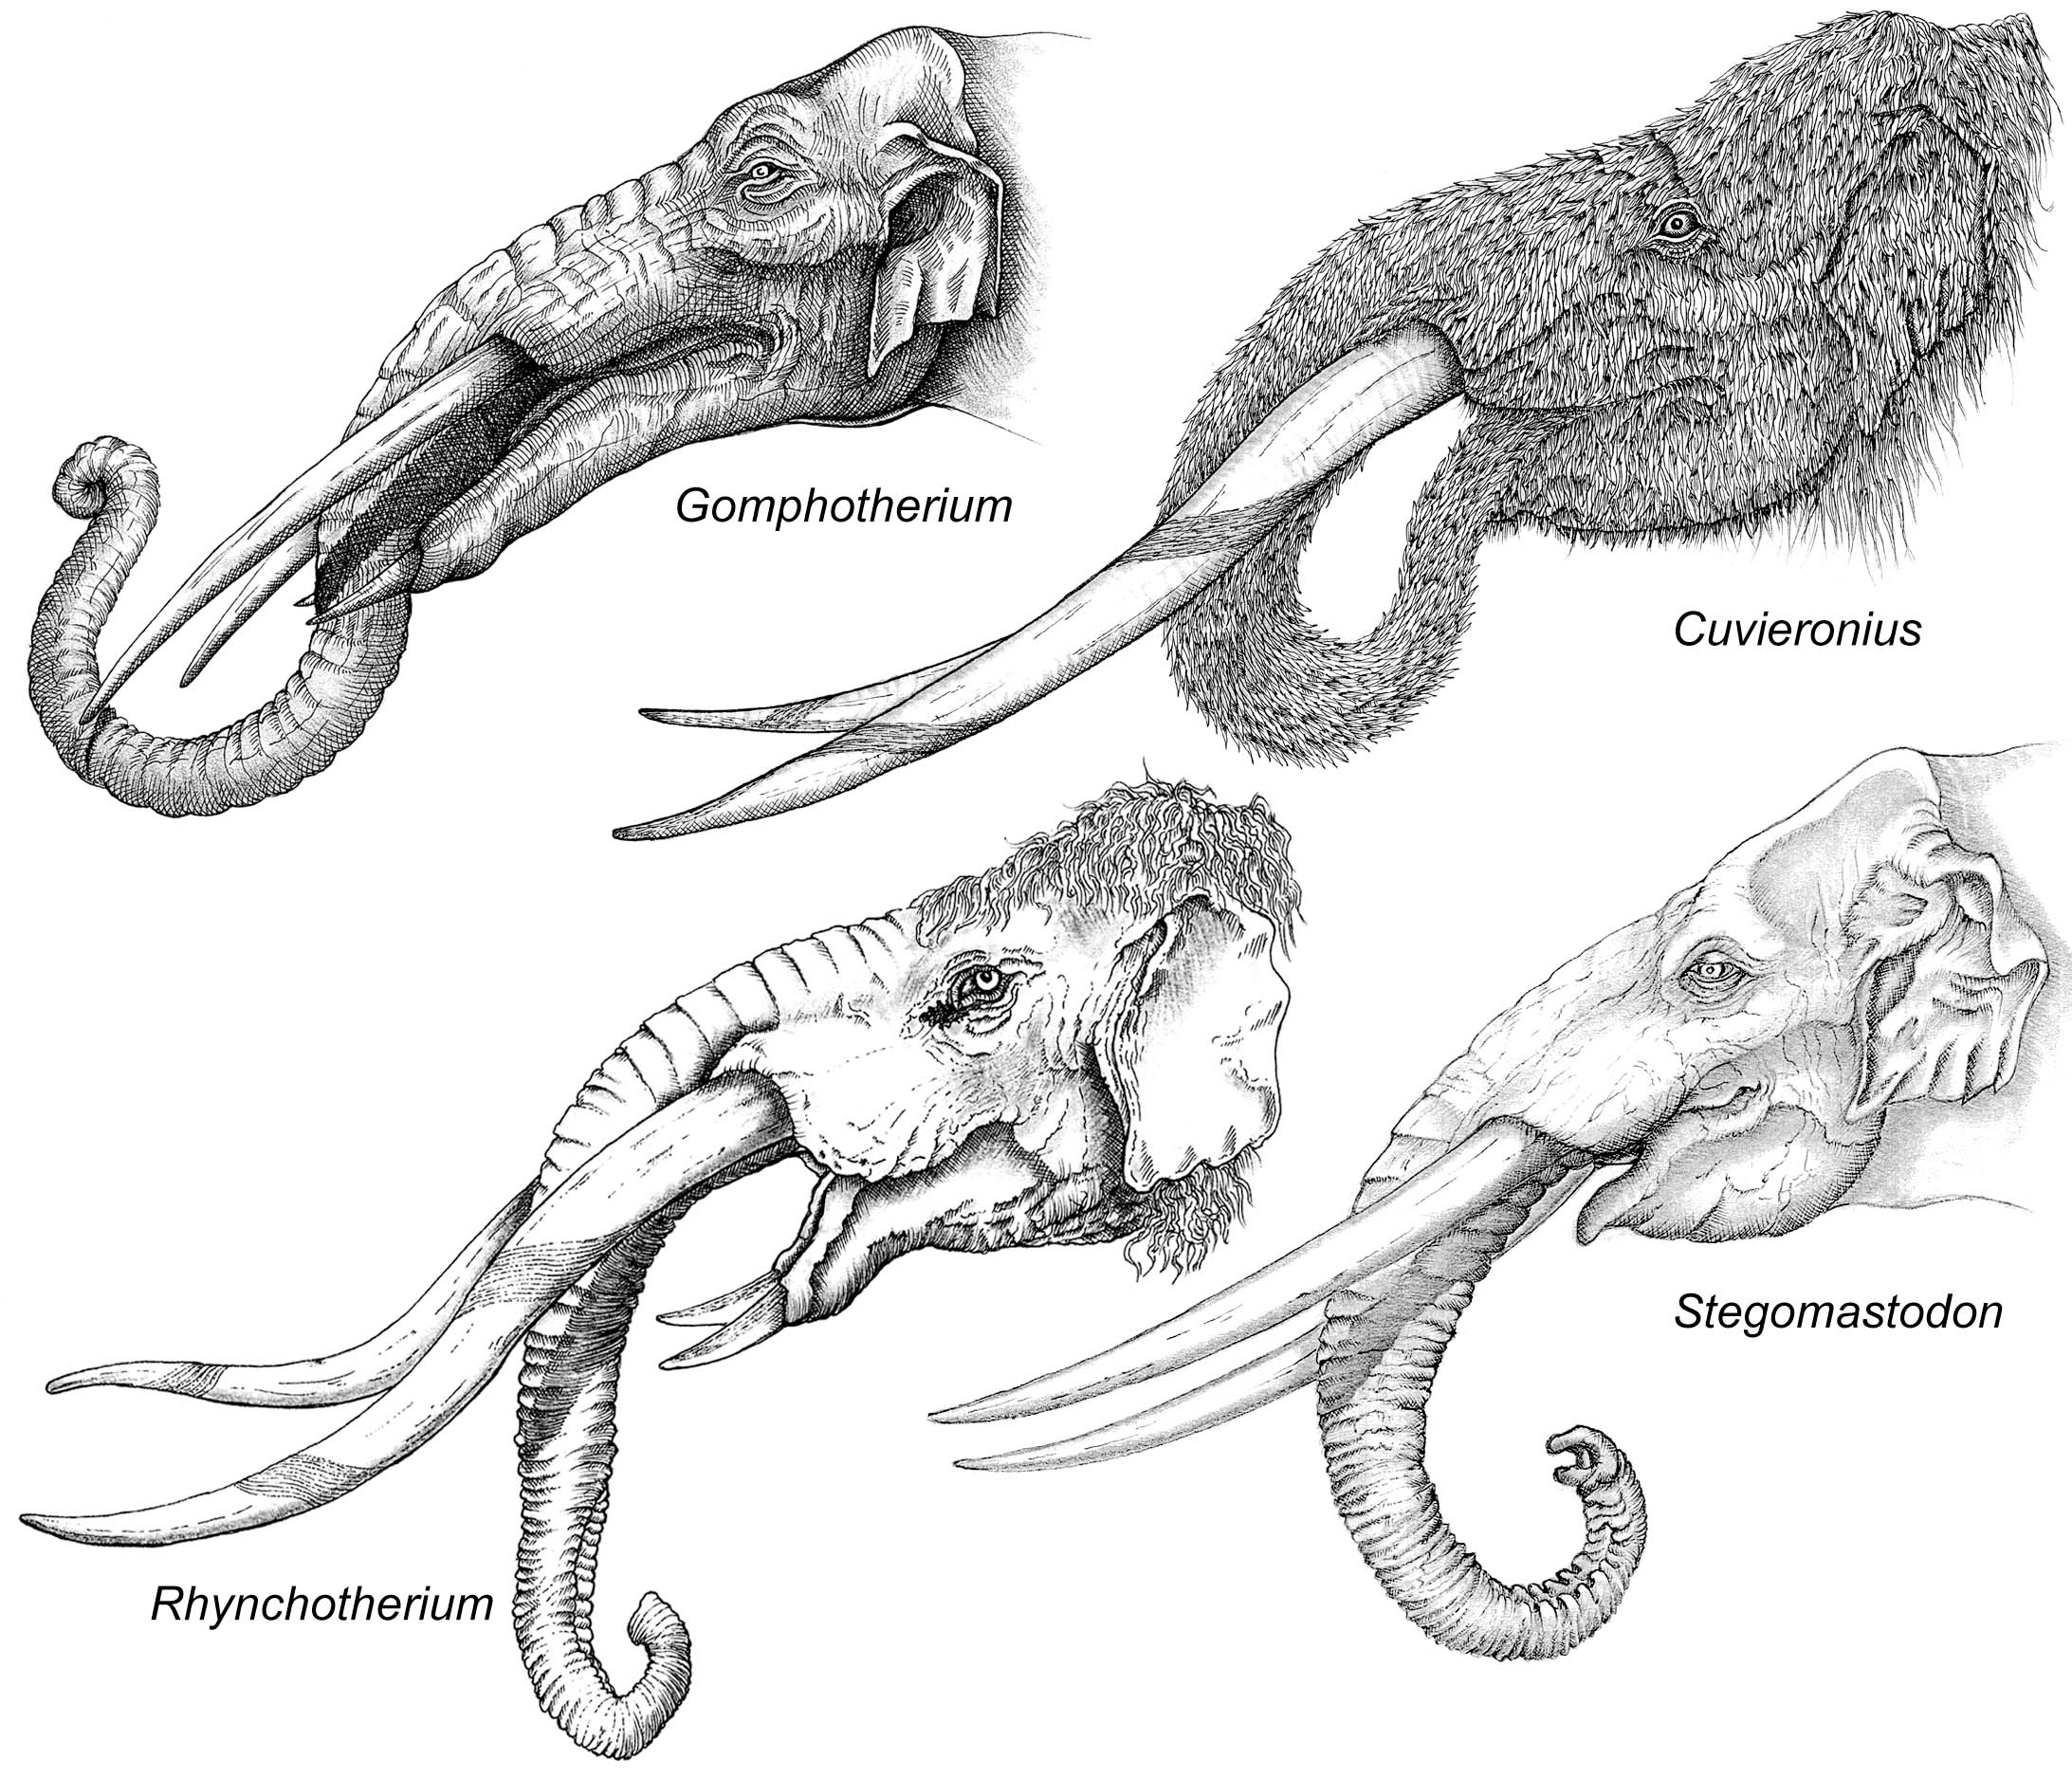 Black and white illustrations of the skulls of four proboscidean species.